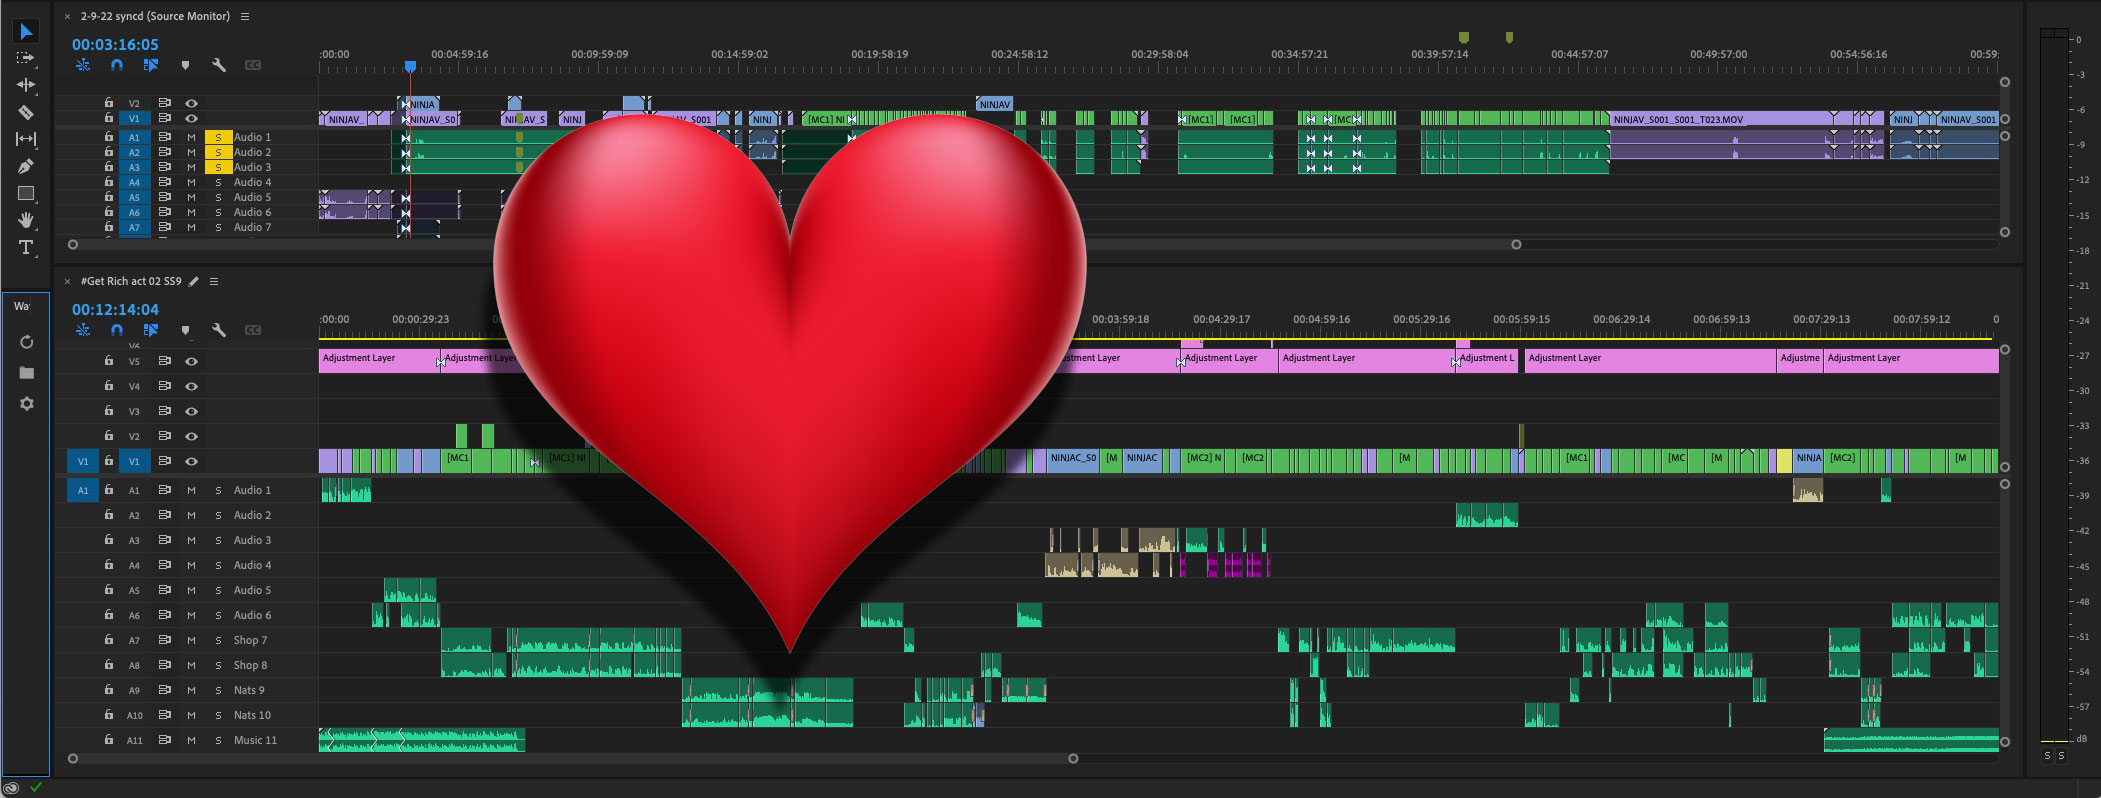 My single most loved feature in Adobe Premiere Pro 57